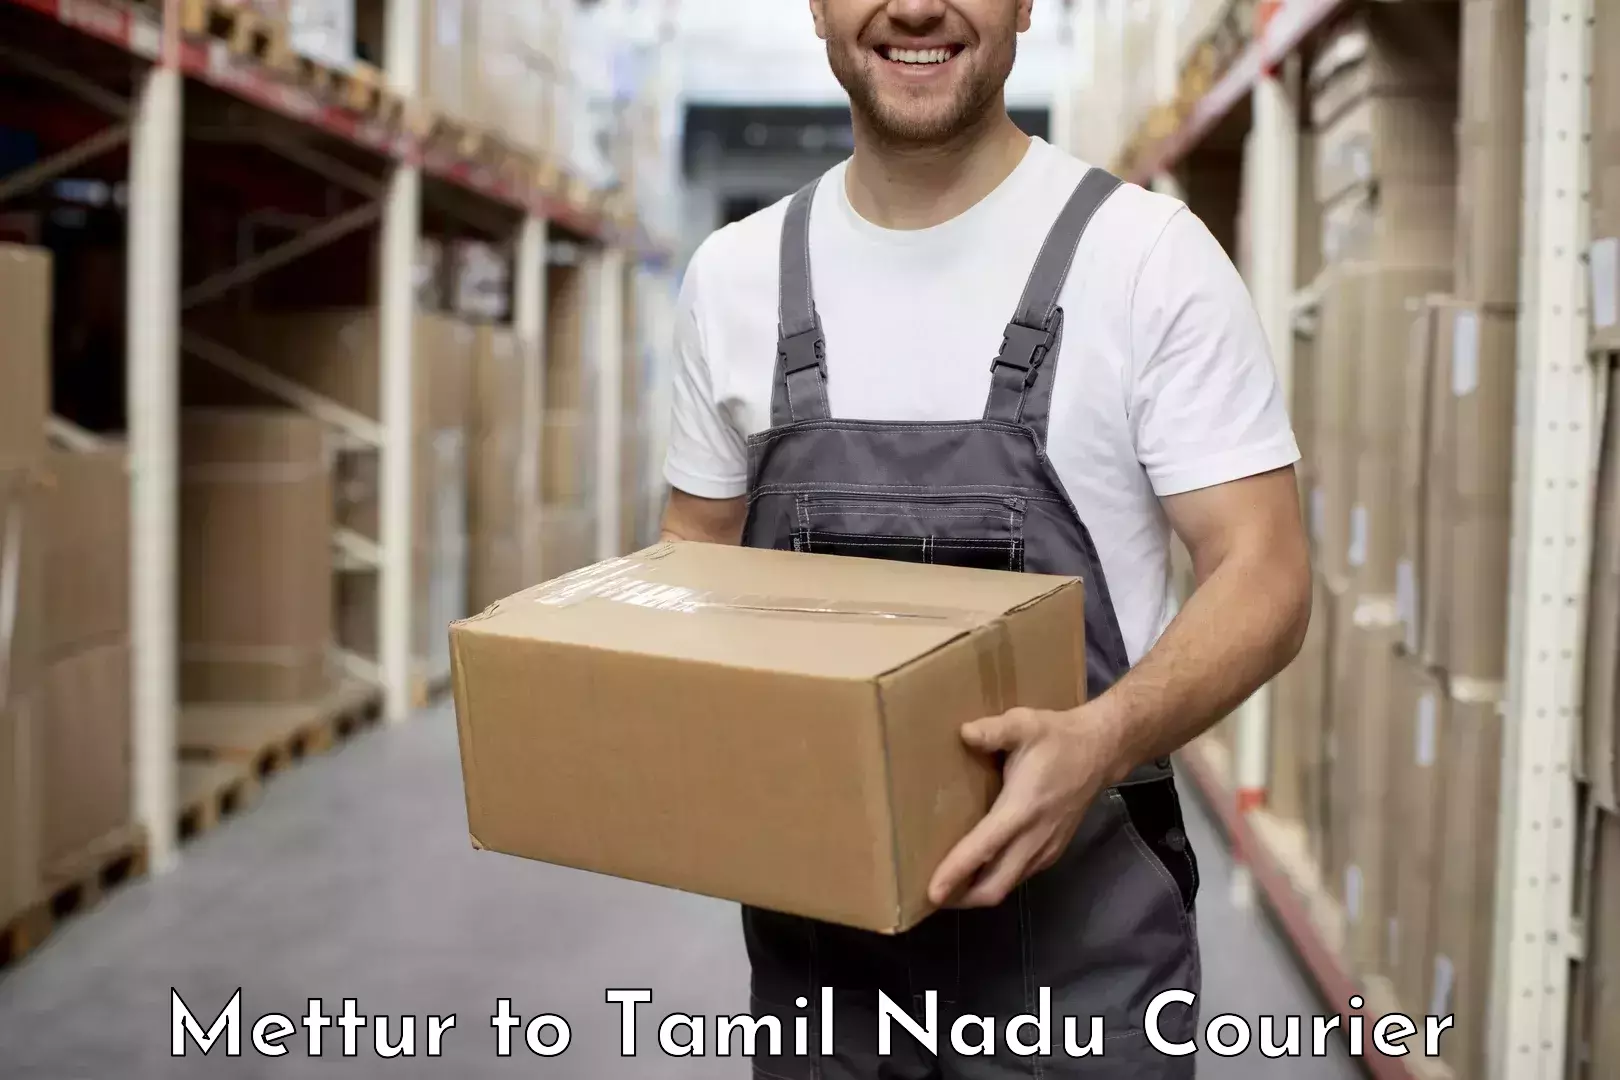 Affordable parcel service Mettur to Anthiyur